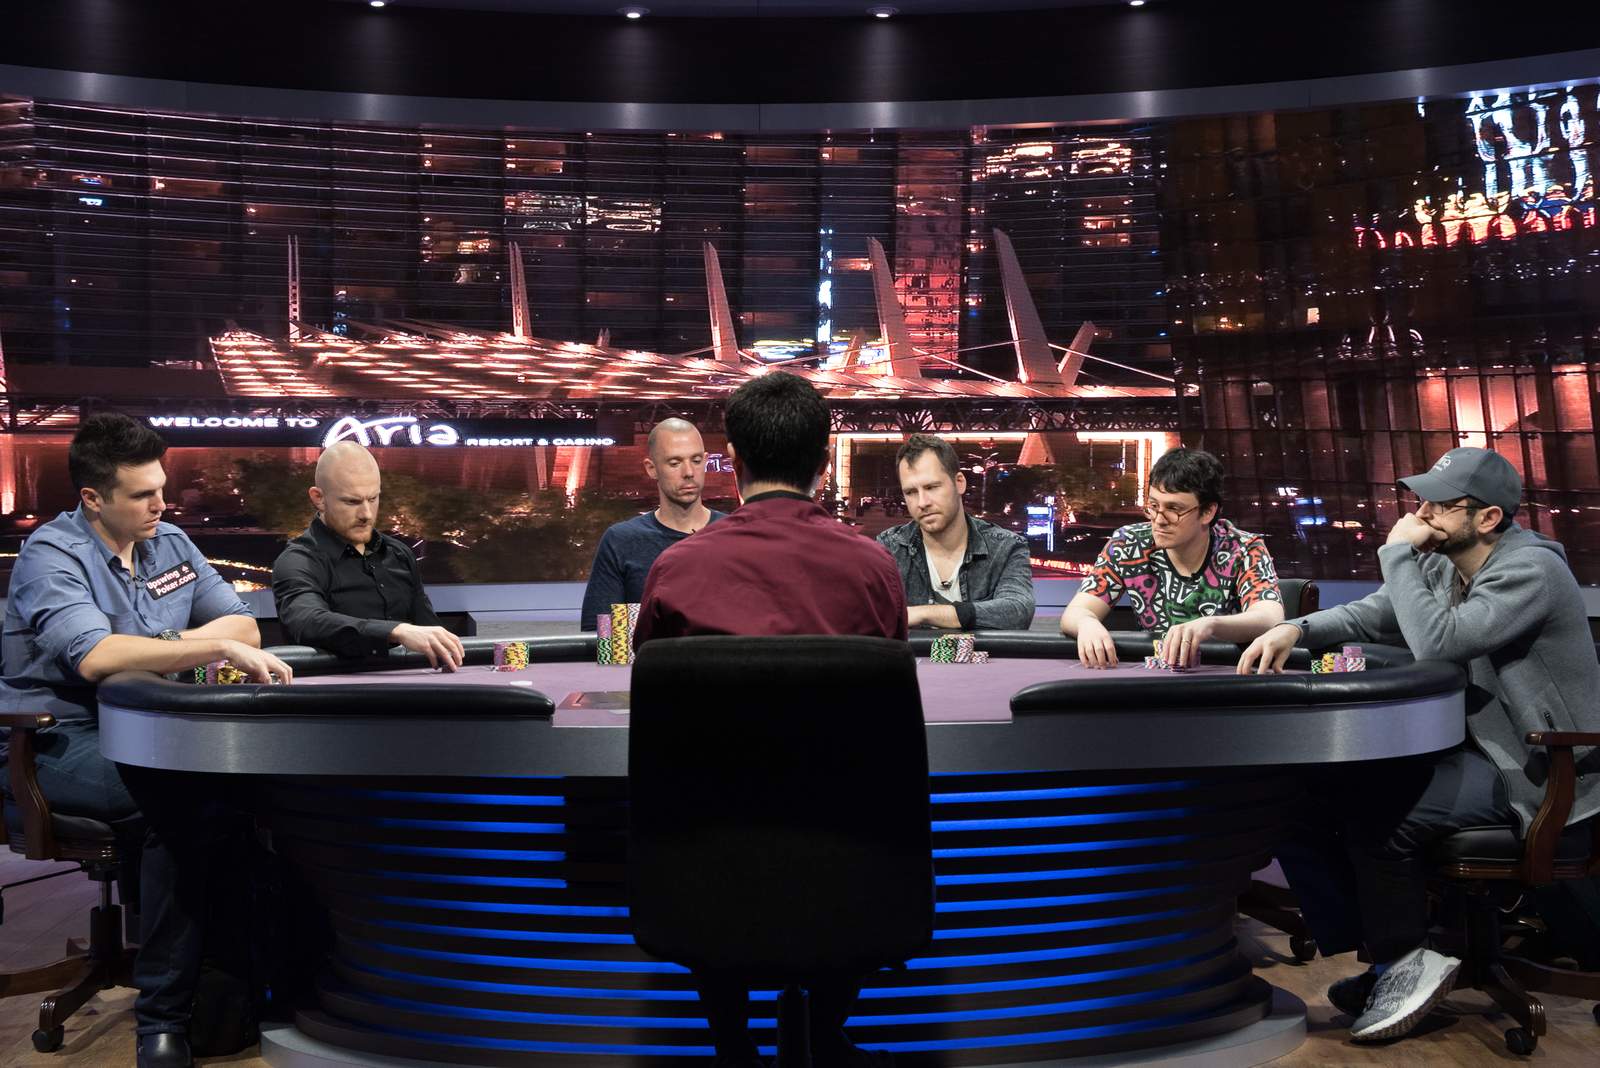 Relive "Rumble with Jungle" on PokerGO